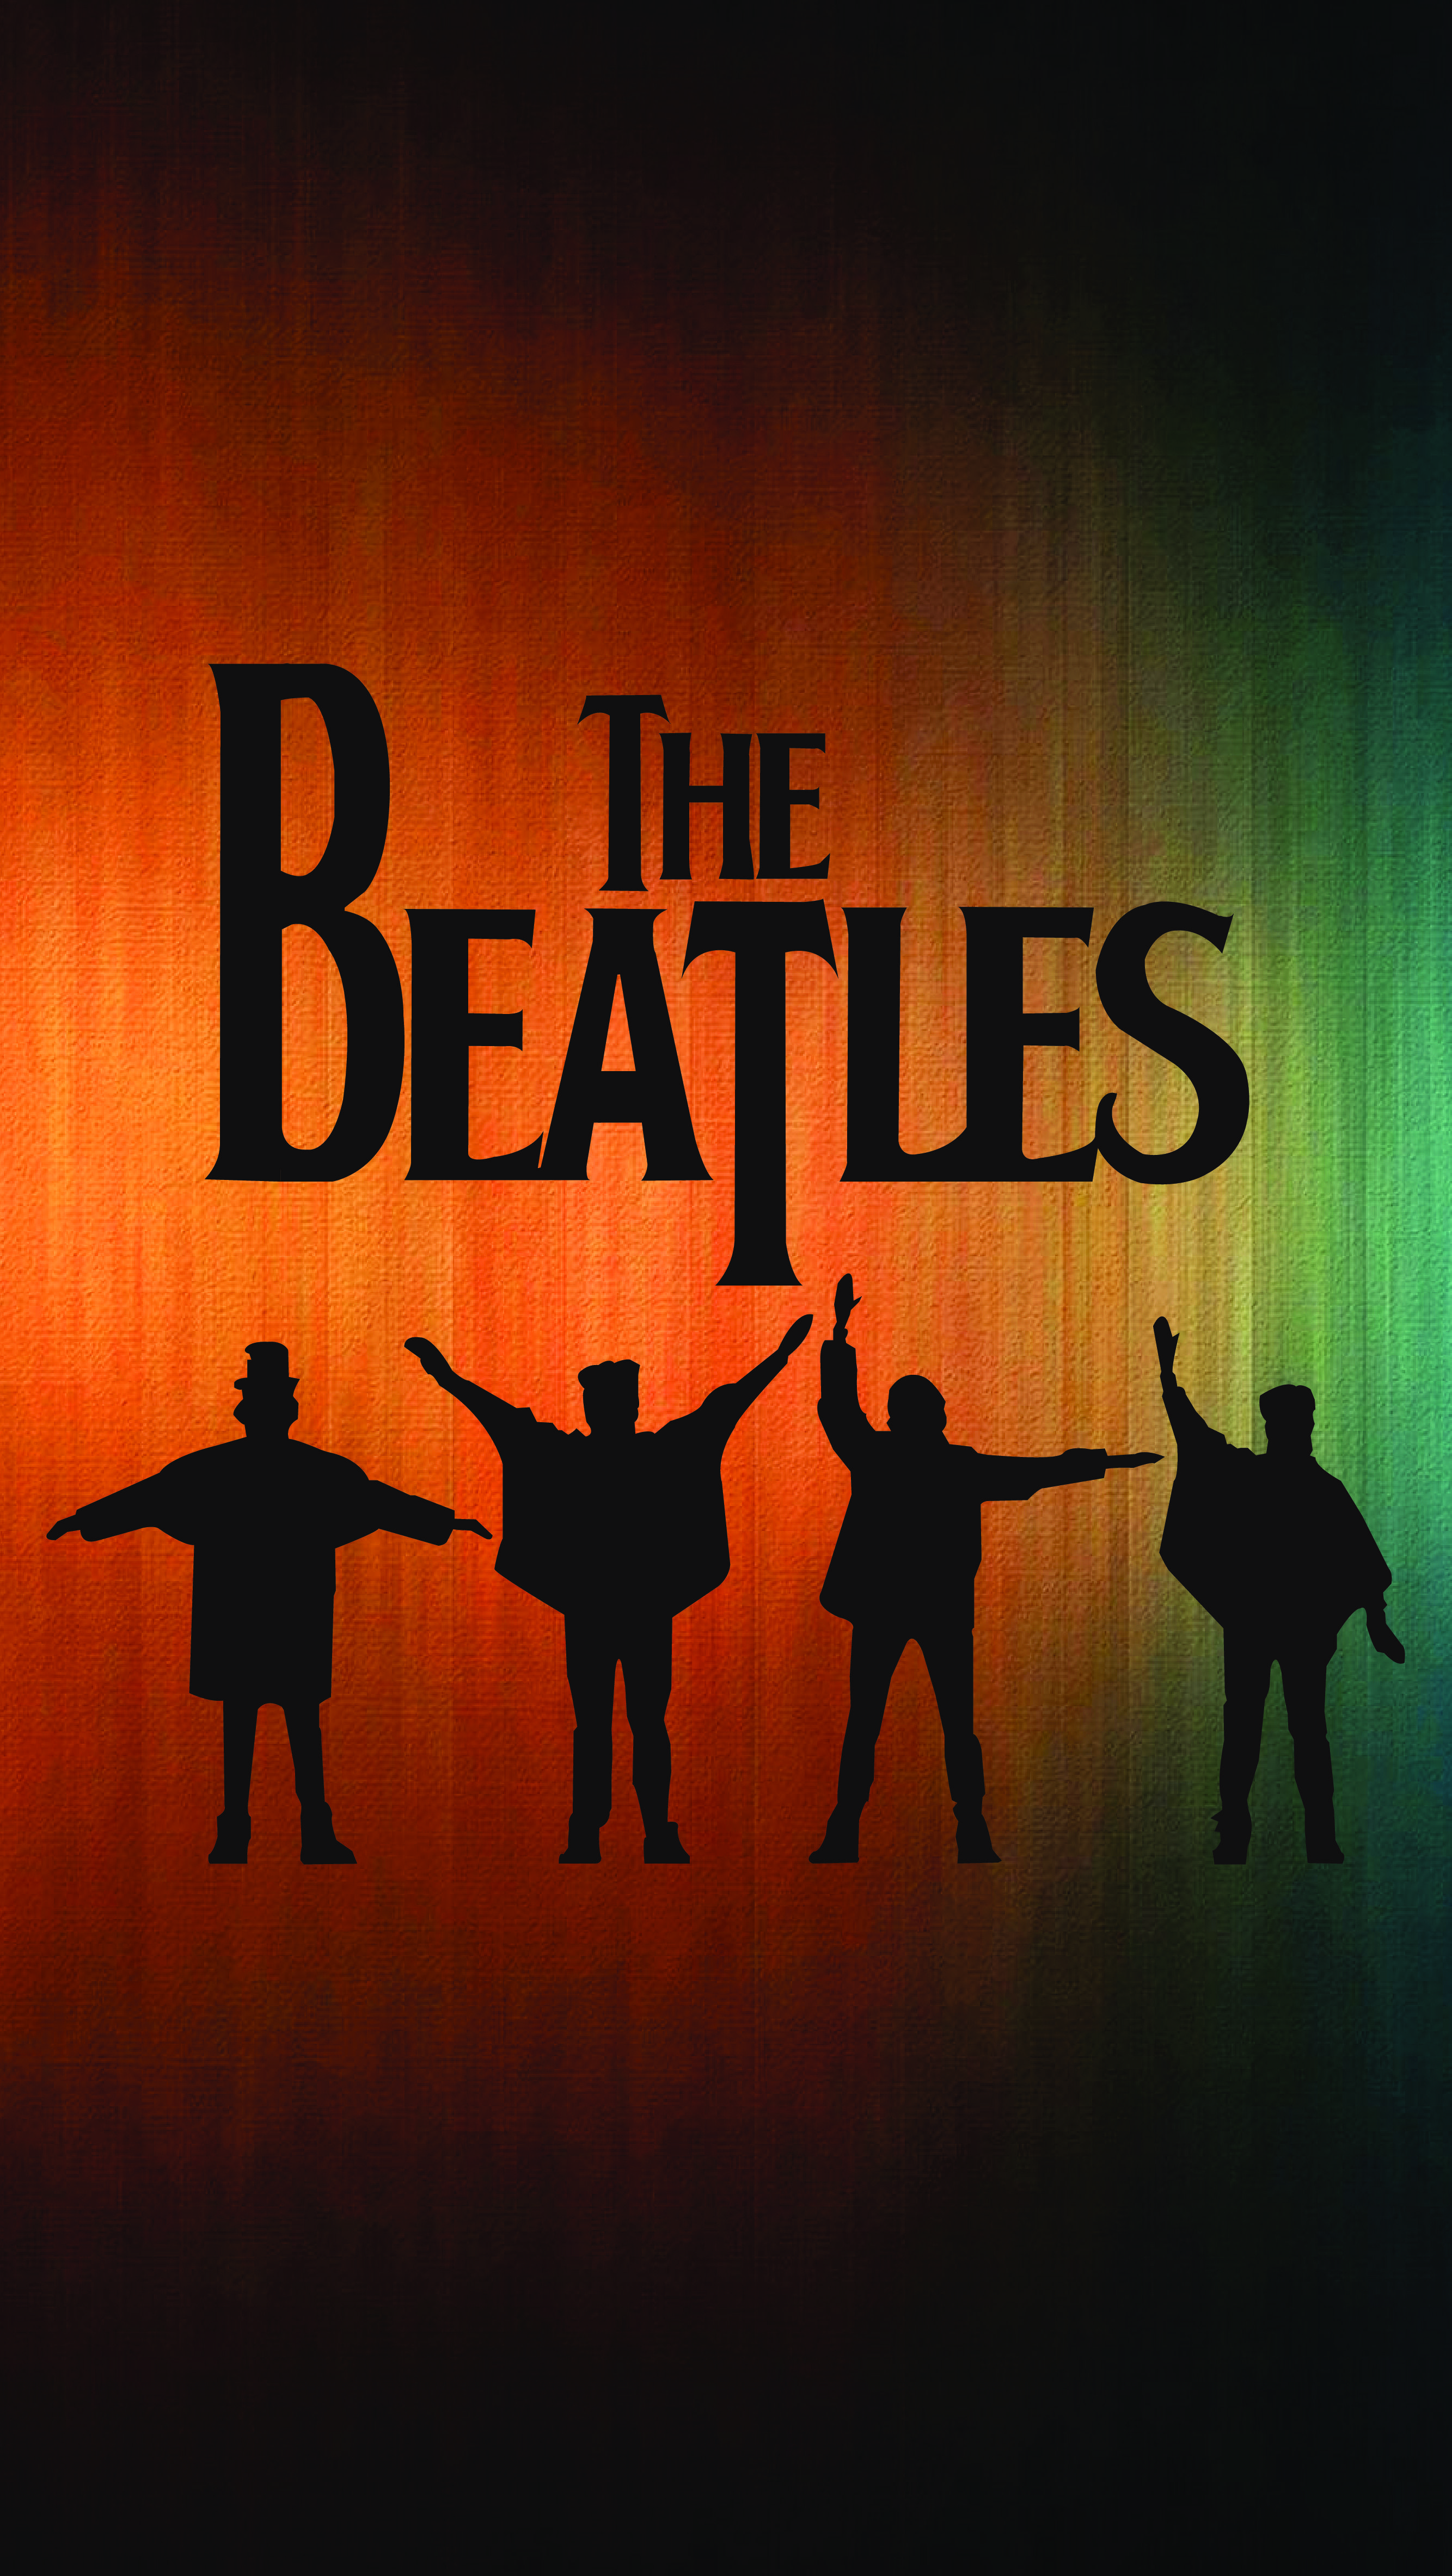 The Beatles Phone Wallpapers.